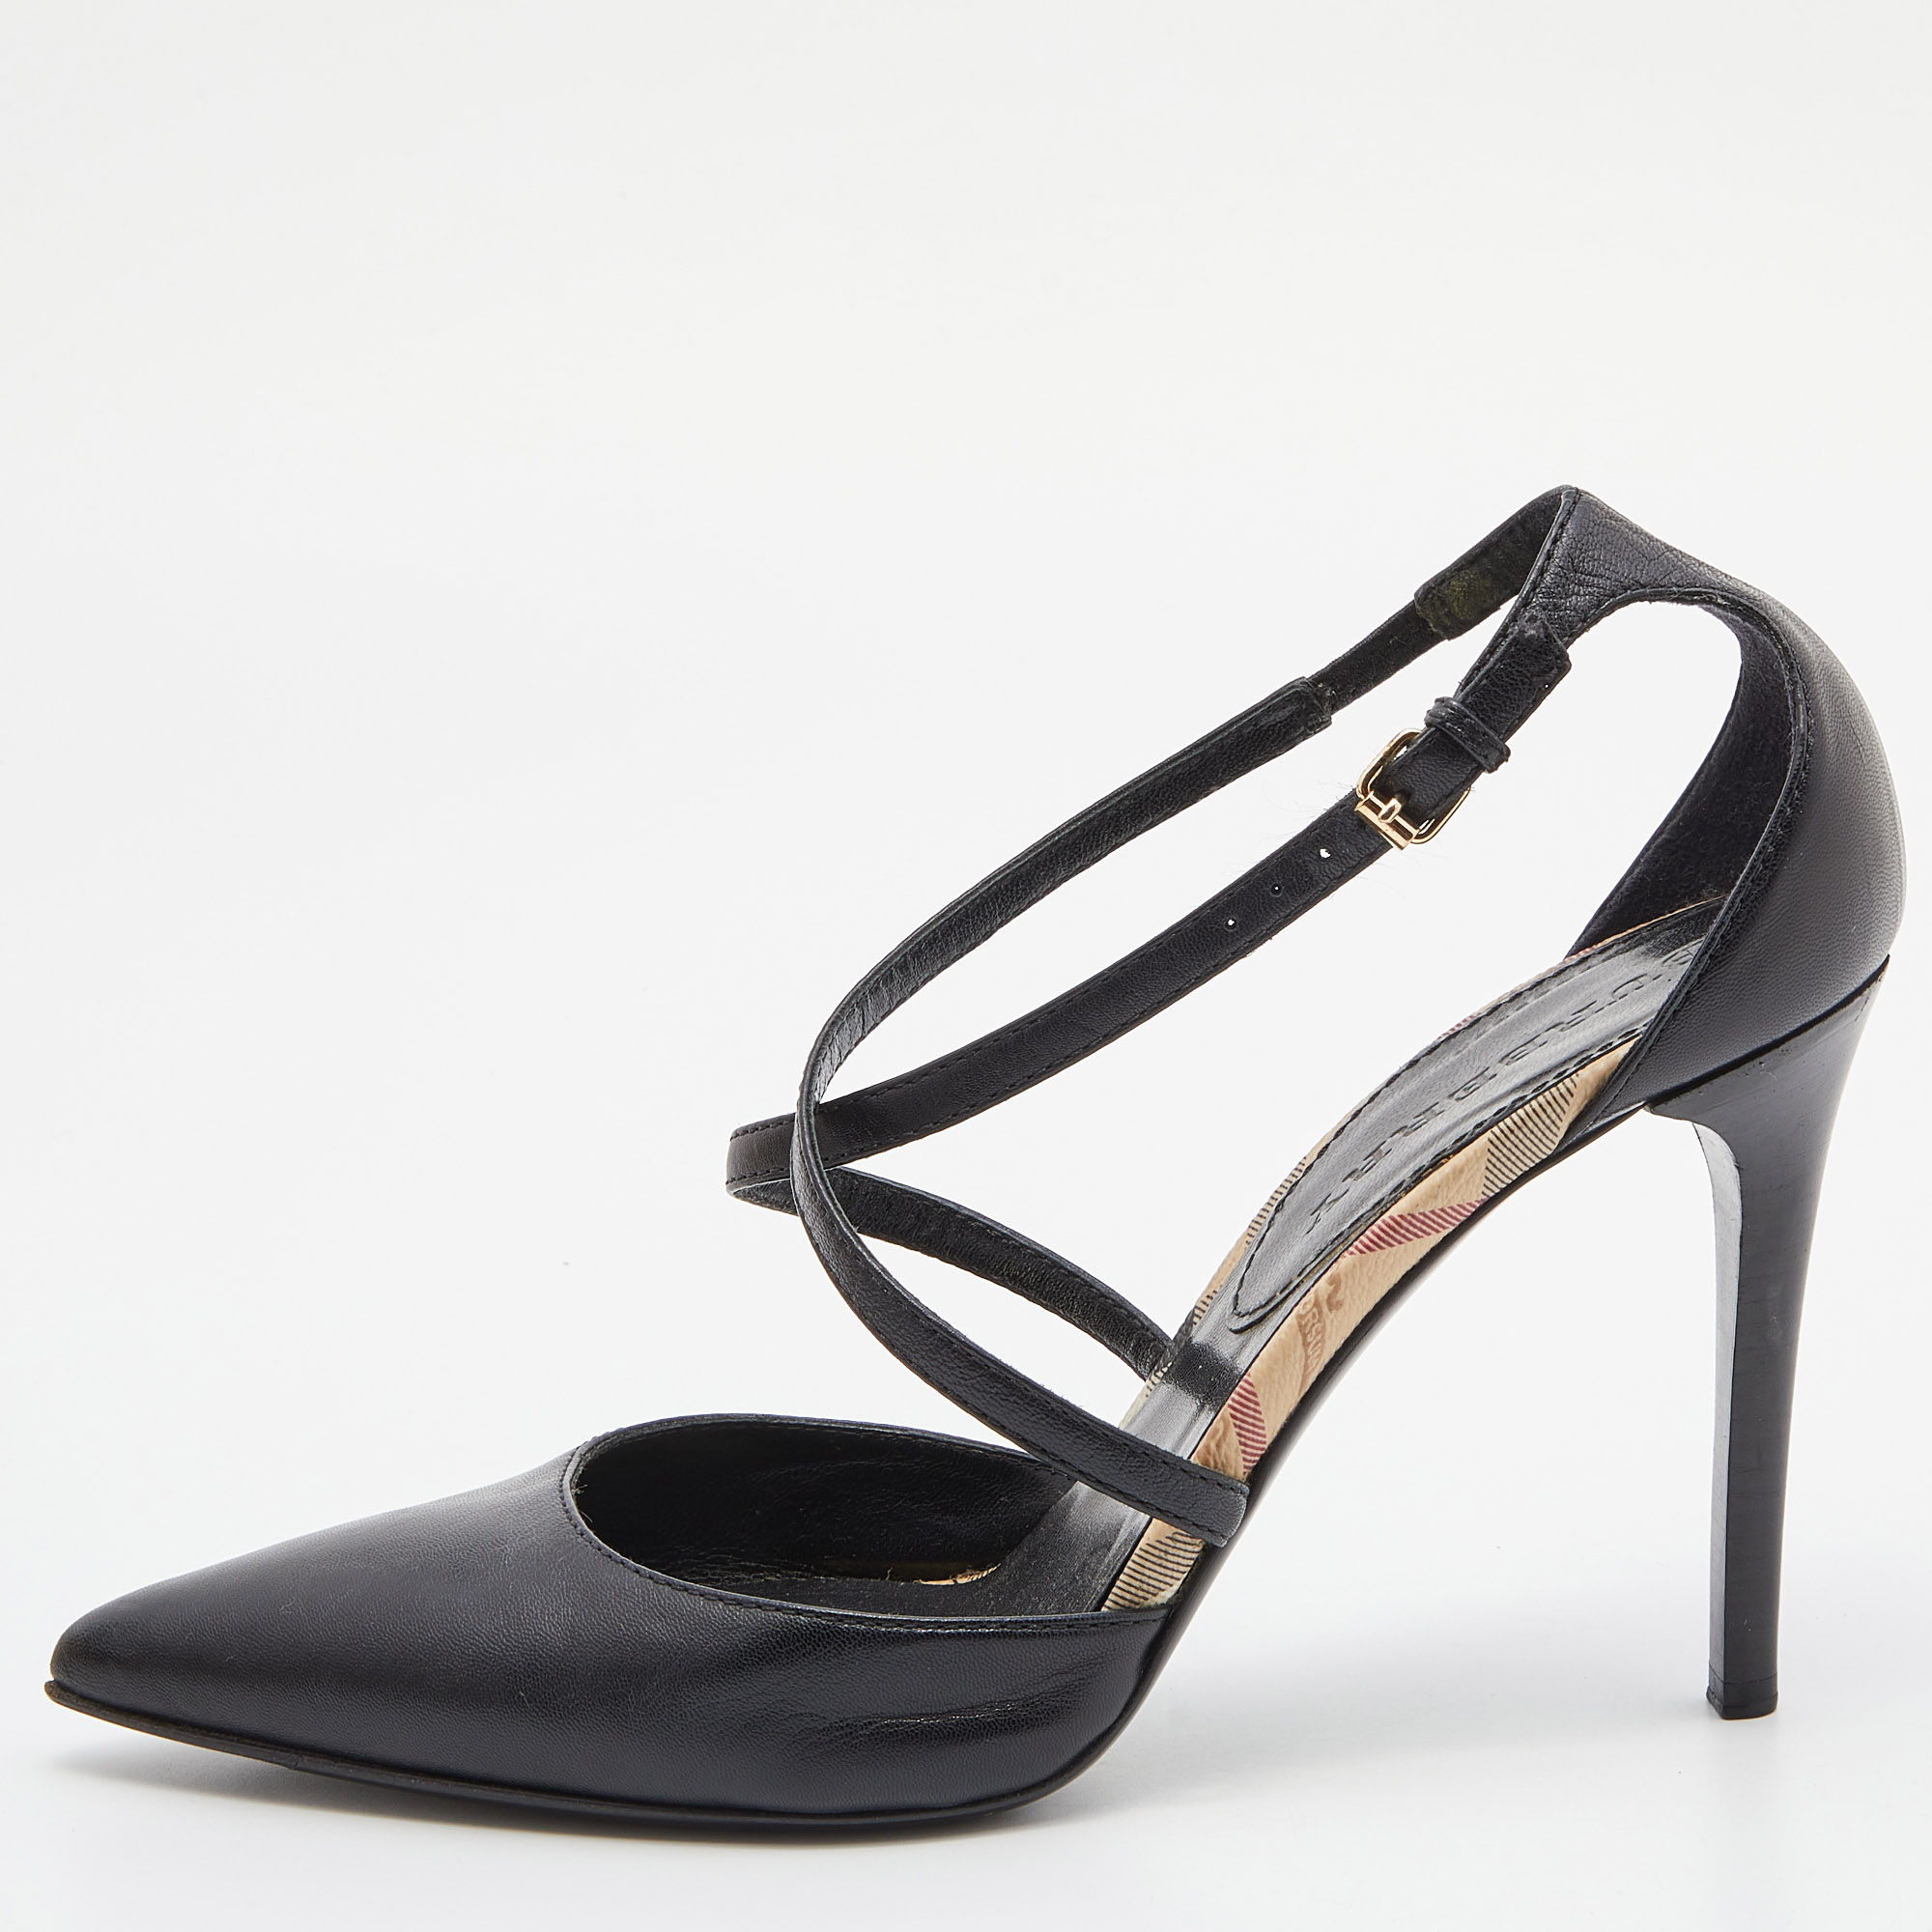 Burberry Black Leather Pointed Toe Ankle Strap Pumps Size 40